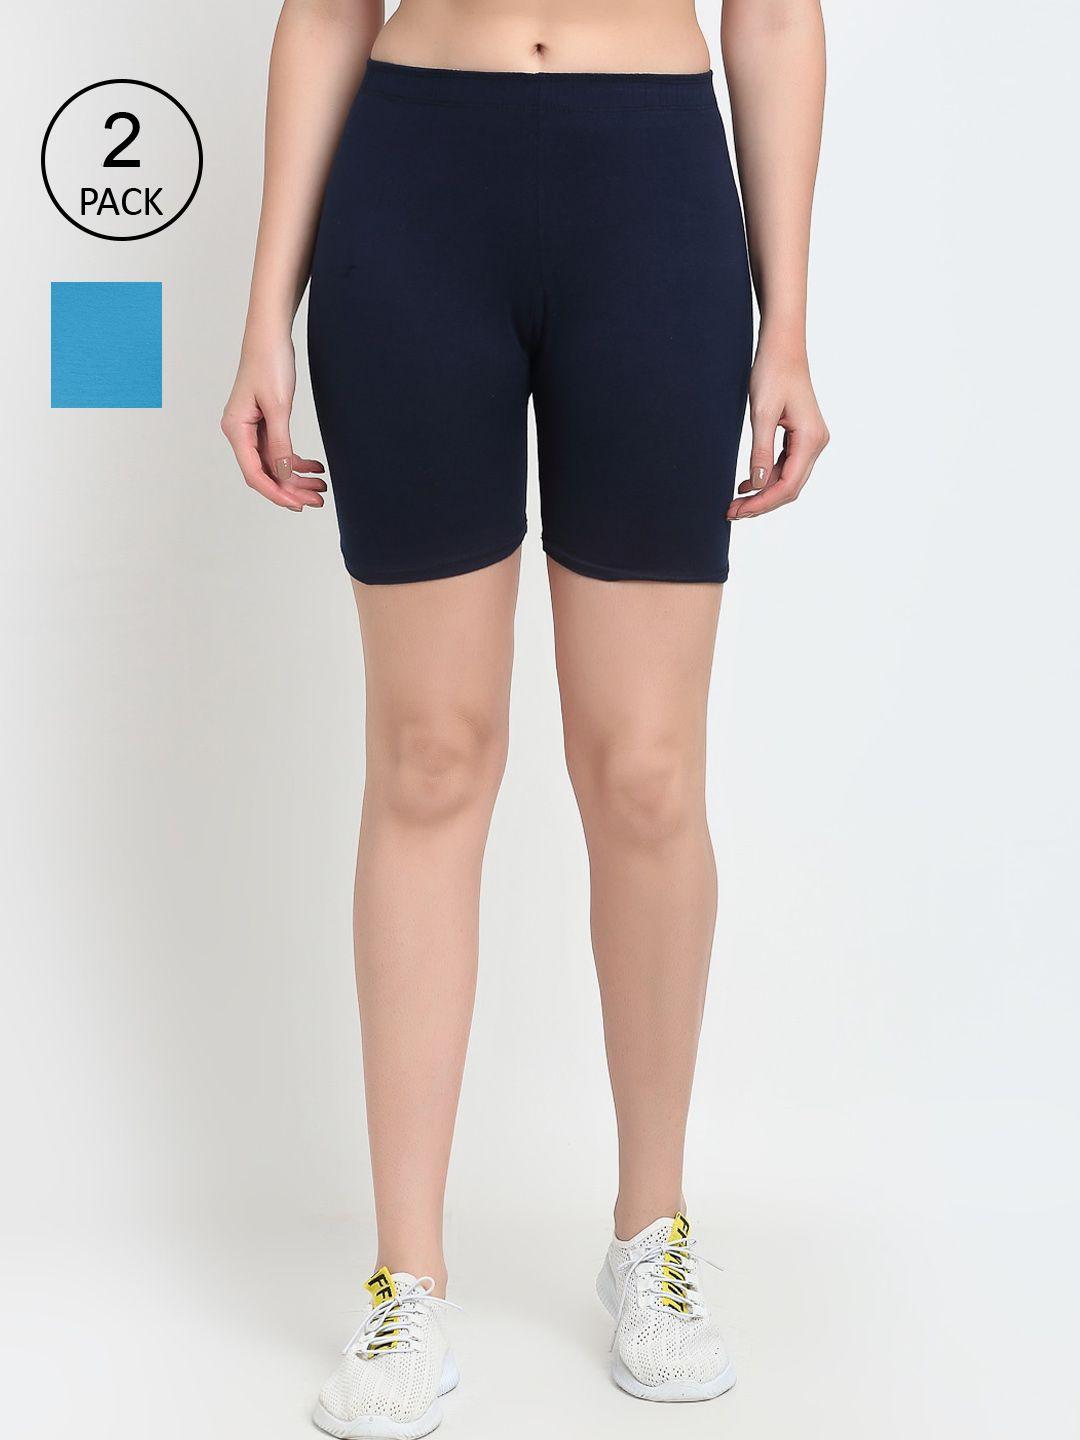 gracit women set of 2 navy blue & blue solid cycling shorts